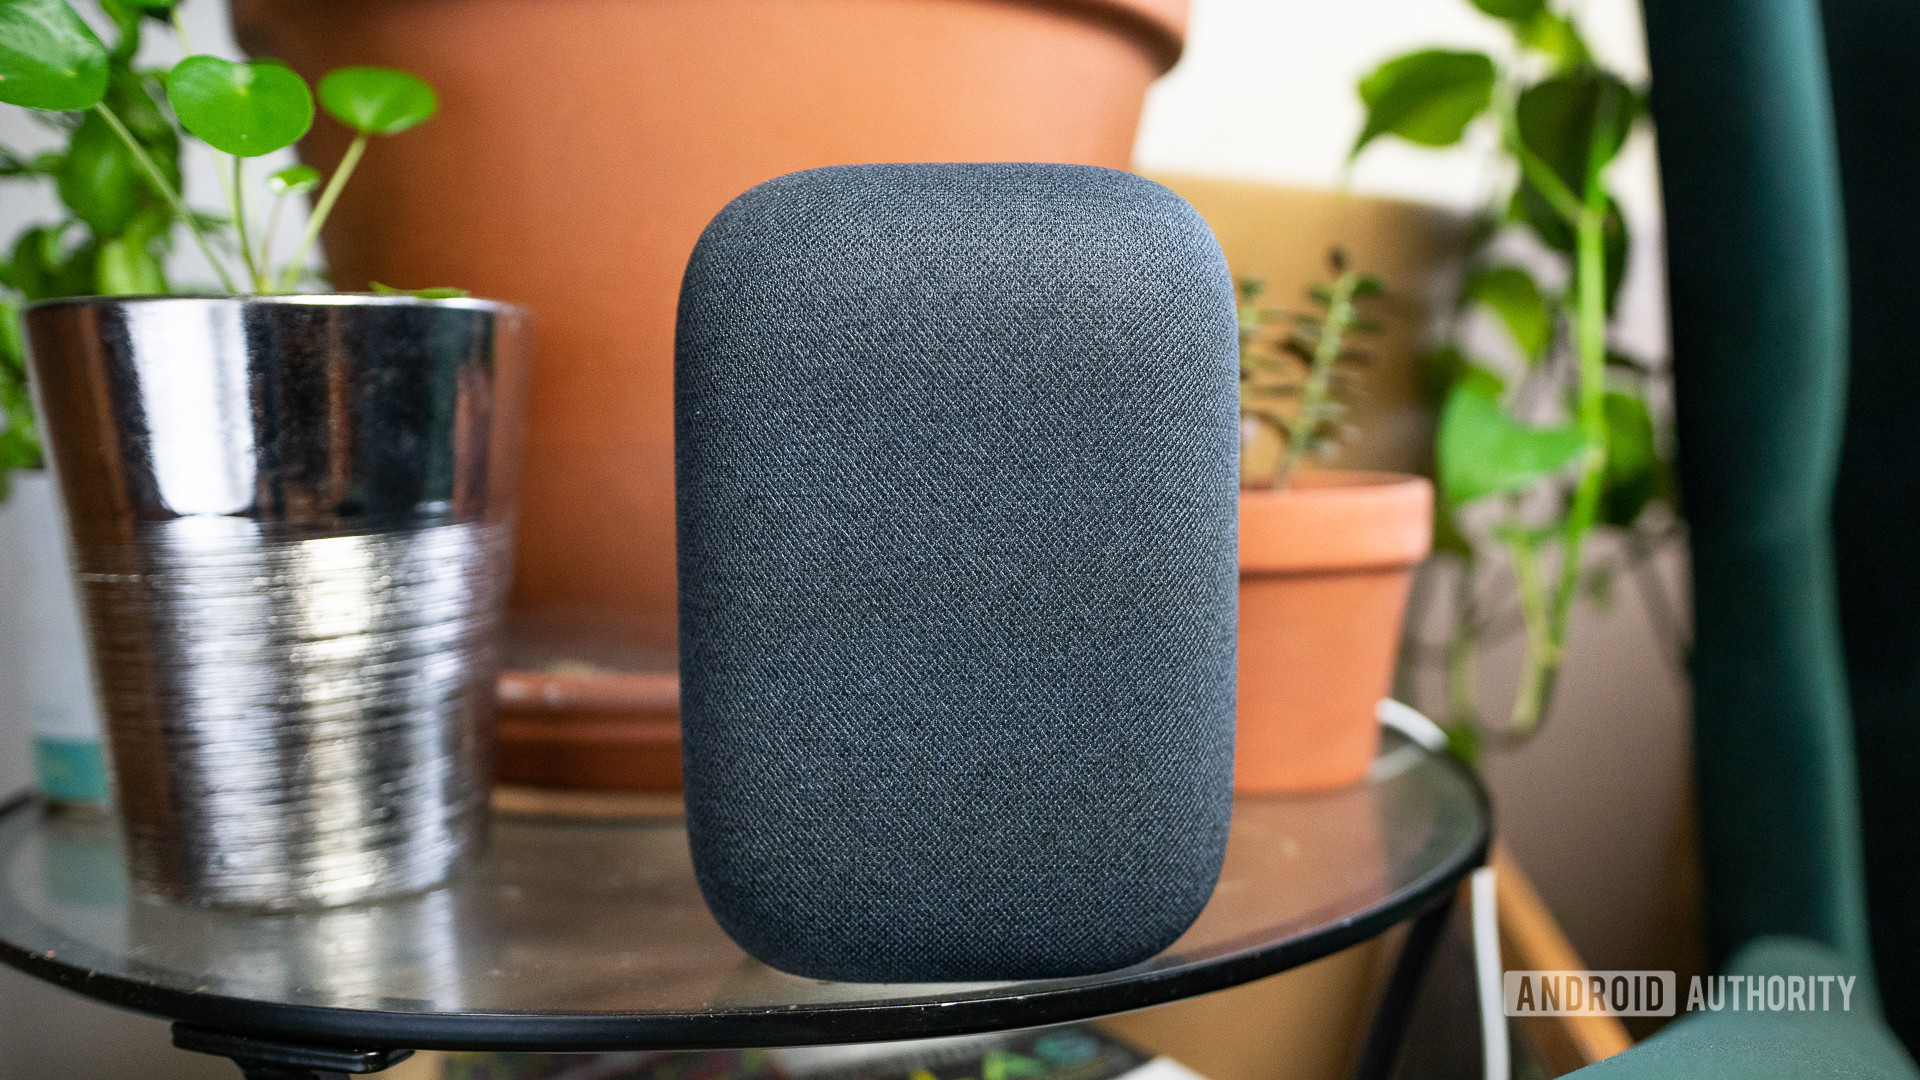 I really want a ChatGPT-like voice assistant in my Google Nest speakers